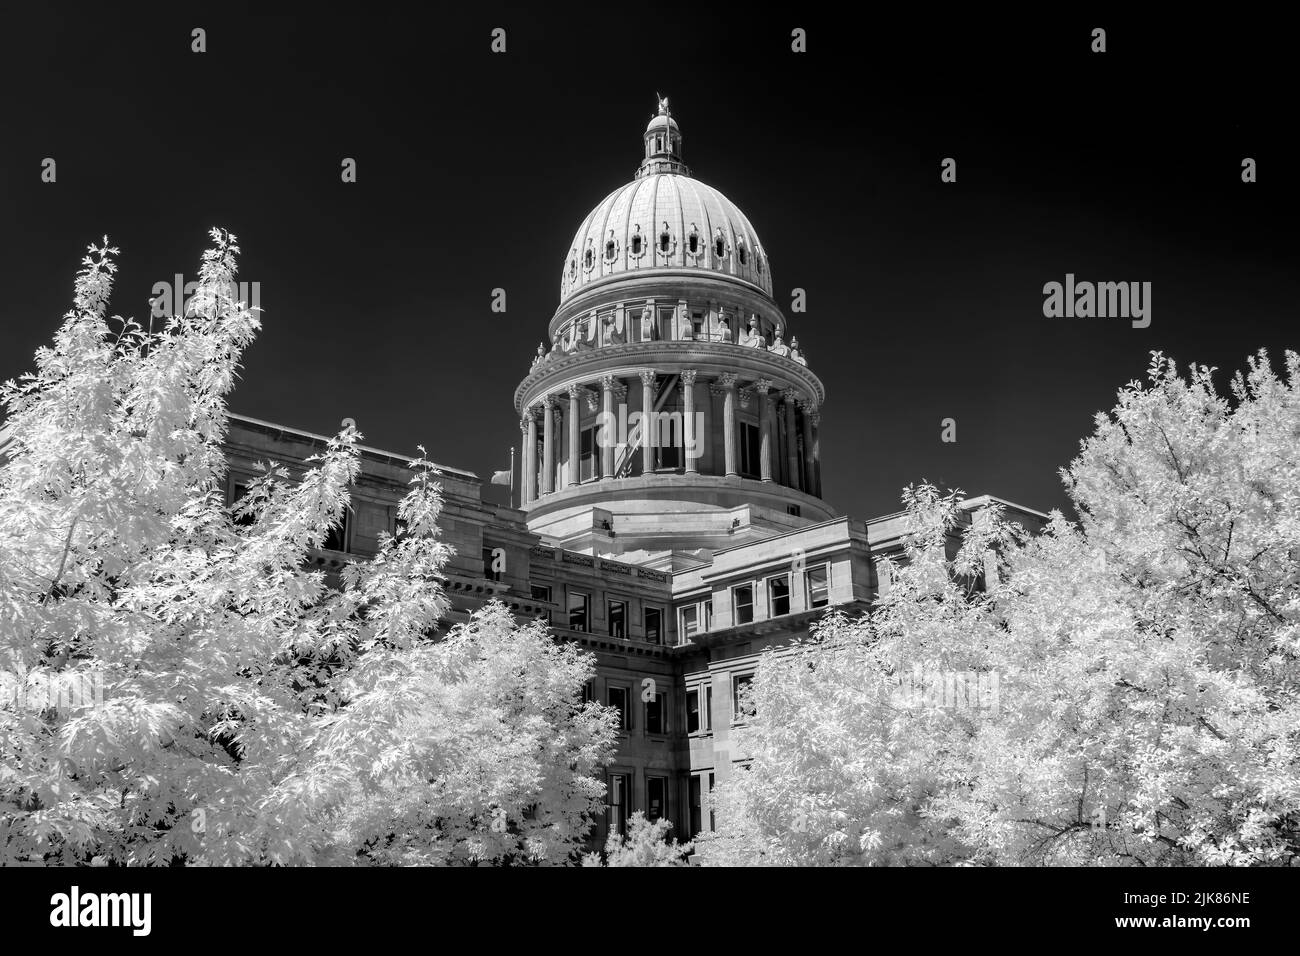 White trees and black sky Capital in monochrome Stock Photo